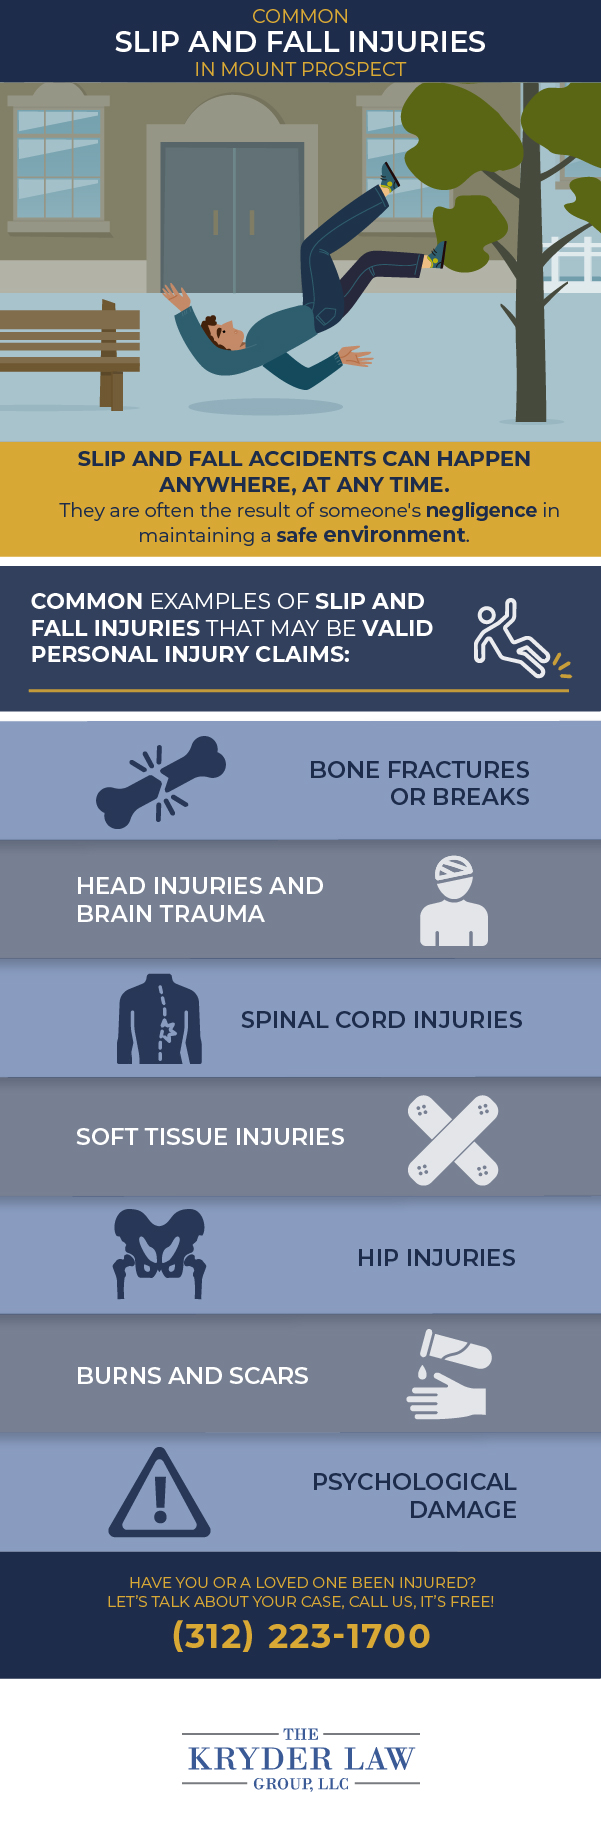 Common Slip and Fall Injuries in Mount Prospect